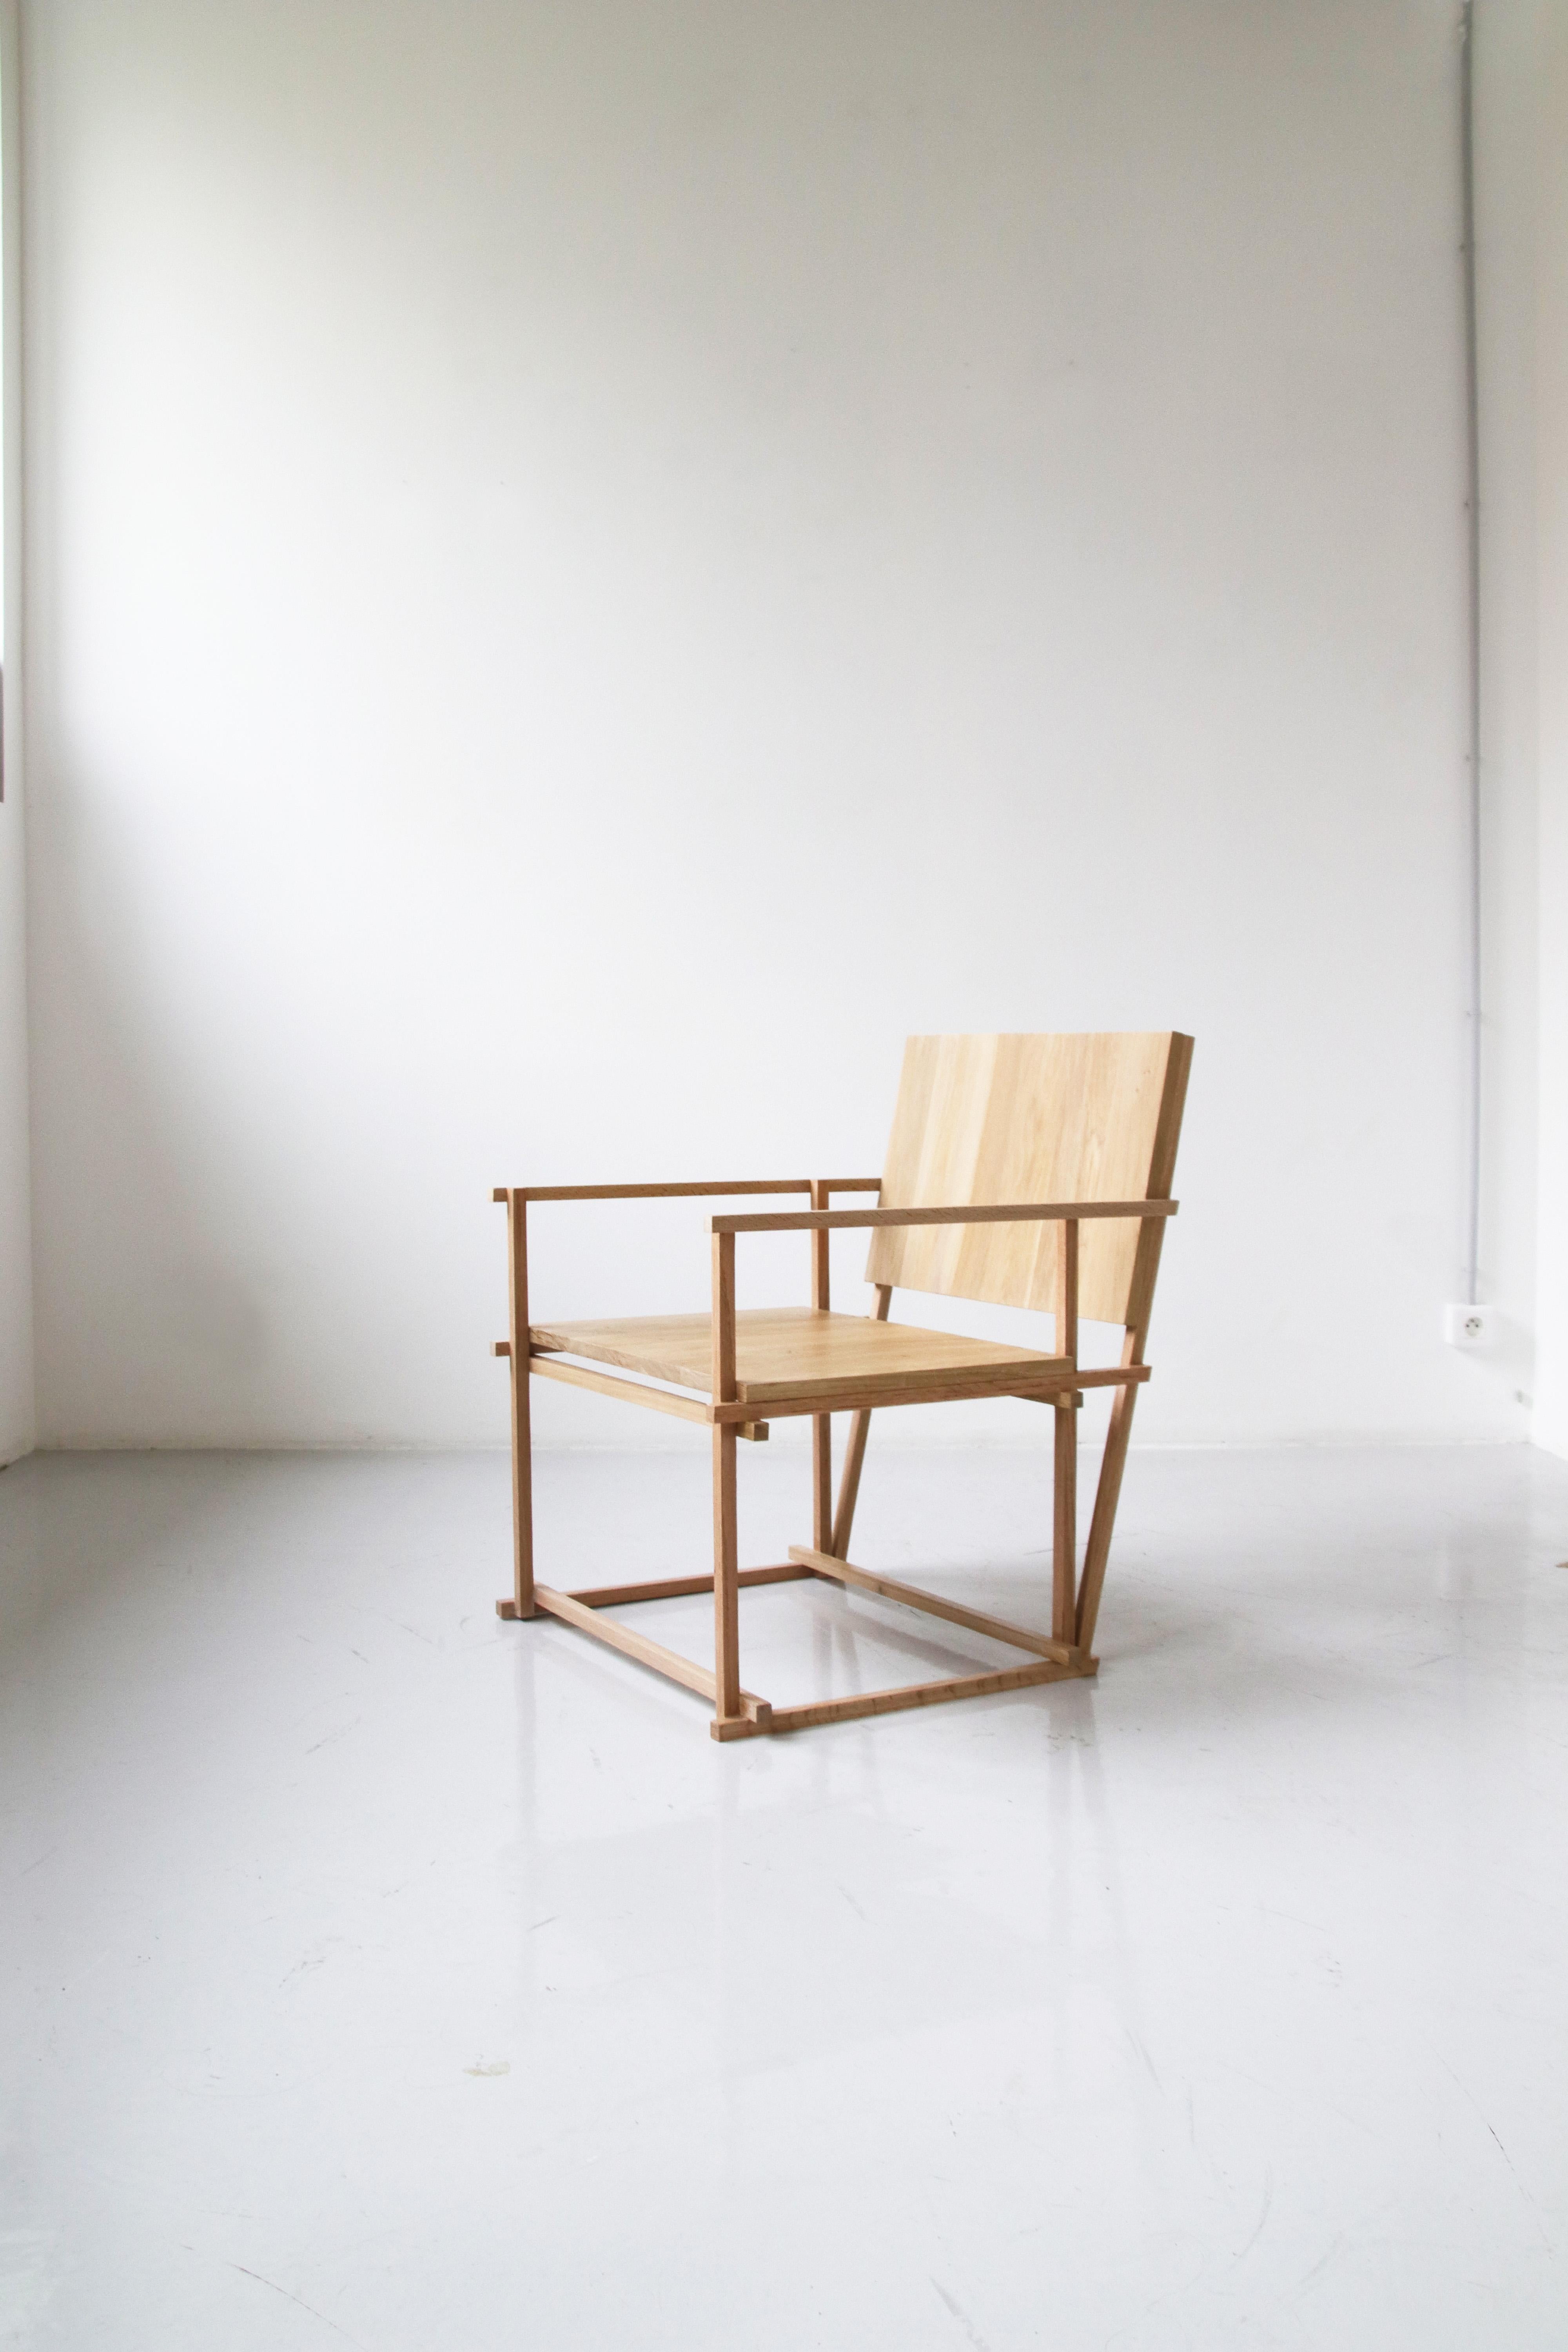 Light Varnish Arles armchair by Alice Lahana Studio
Dimensions: 85 x 45 x 38 cm
Materials: Oak
Available finishing: dark and light varnish
Mat varnish, Mat varnish dark oak, medium oak

Alice Lahana is a french designer based in Paris. While